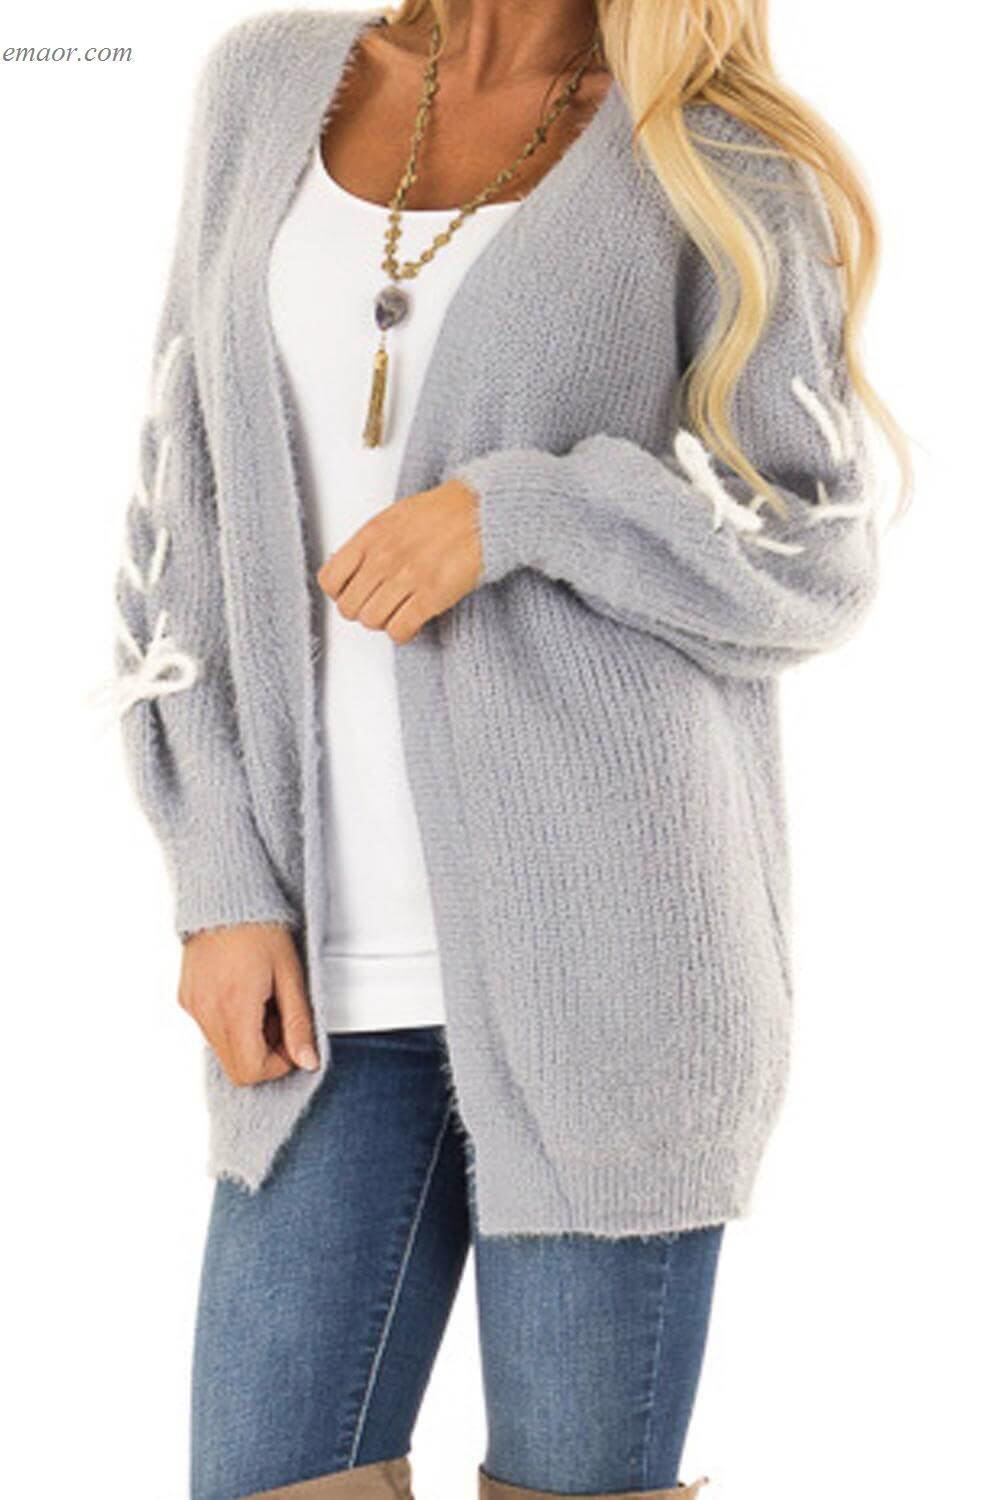 Outerwear Warm Outerwear on Sale Cardigan with Stitch Detail Outerwear